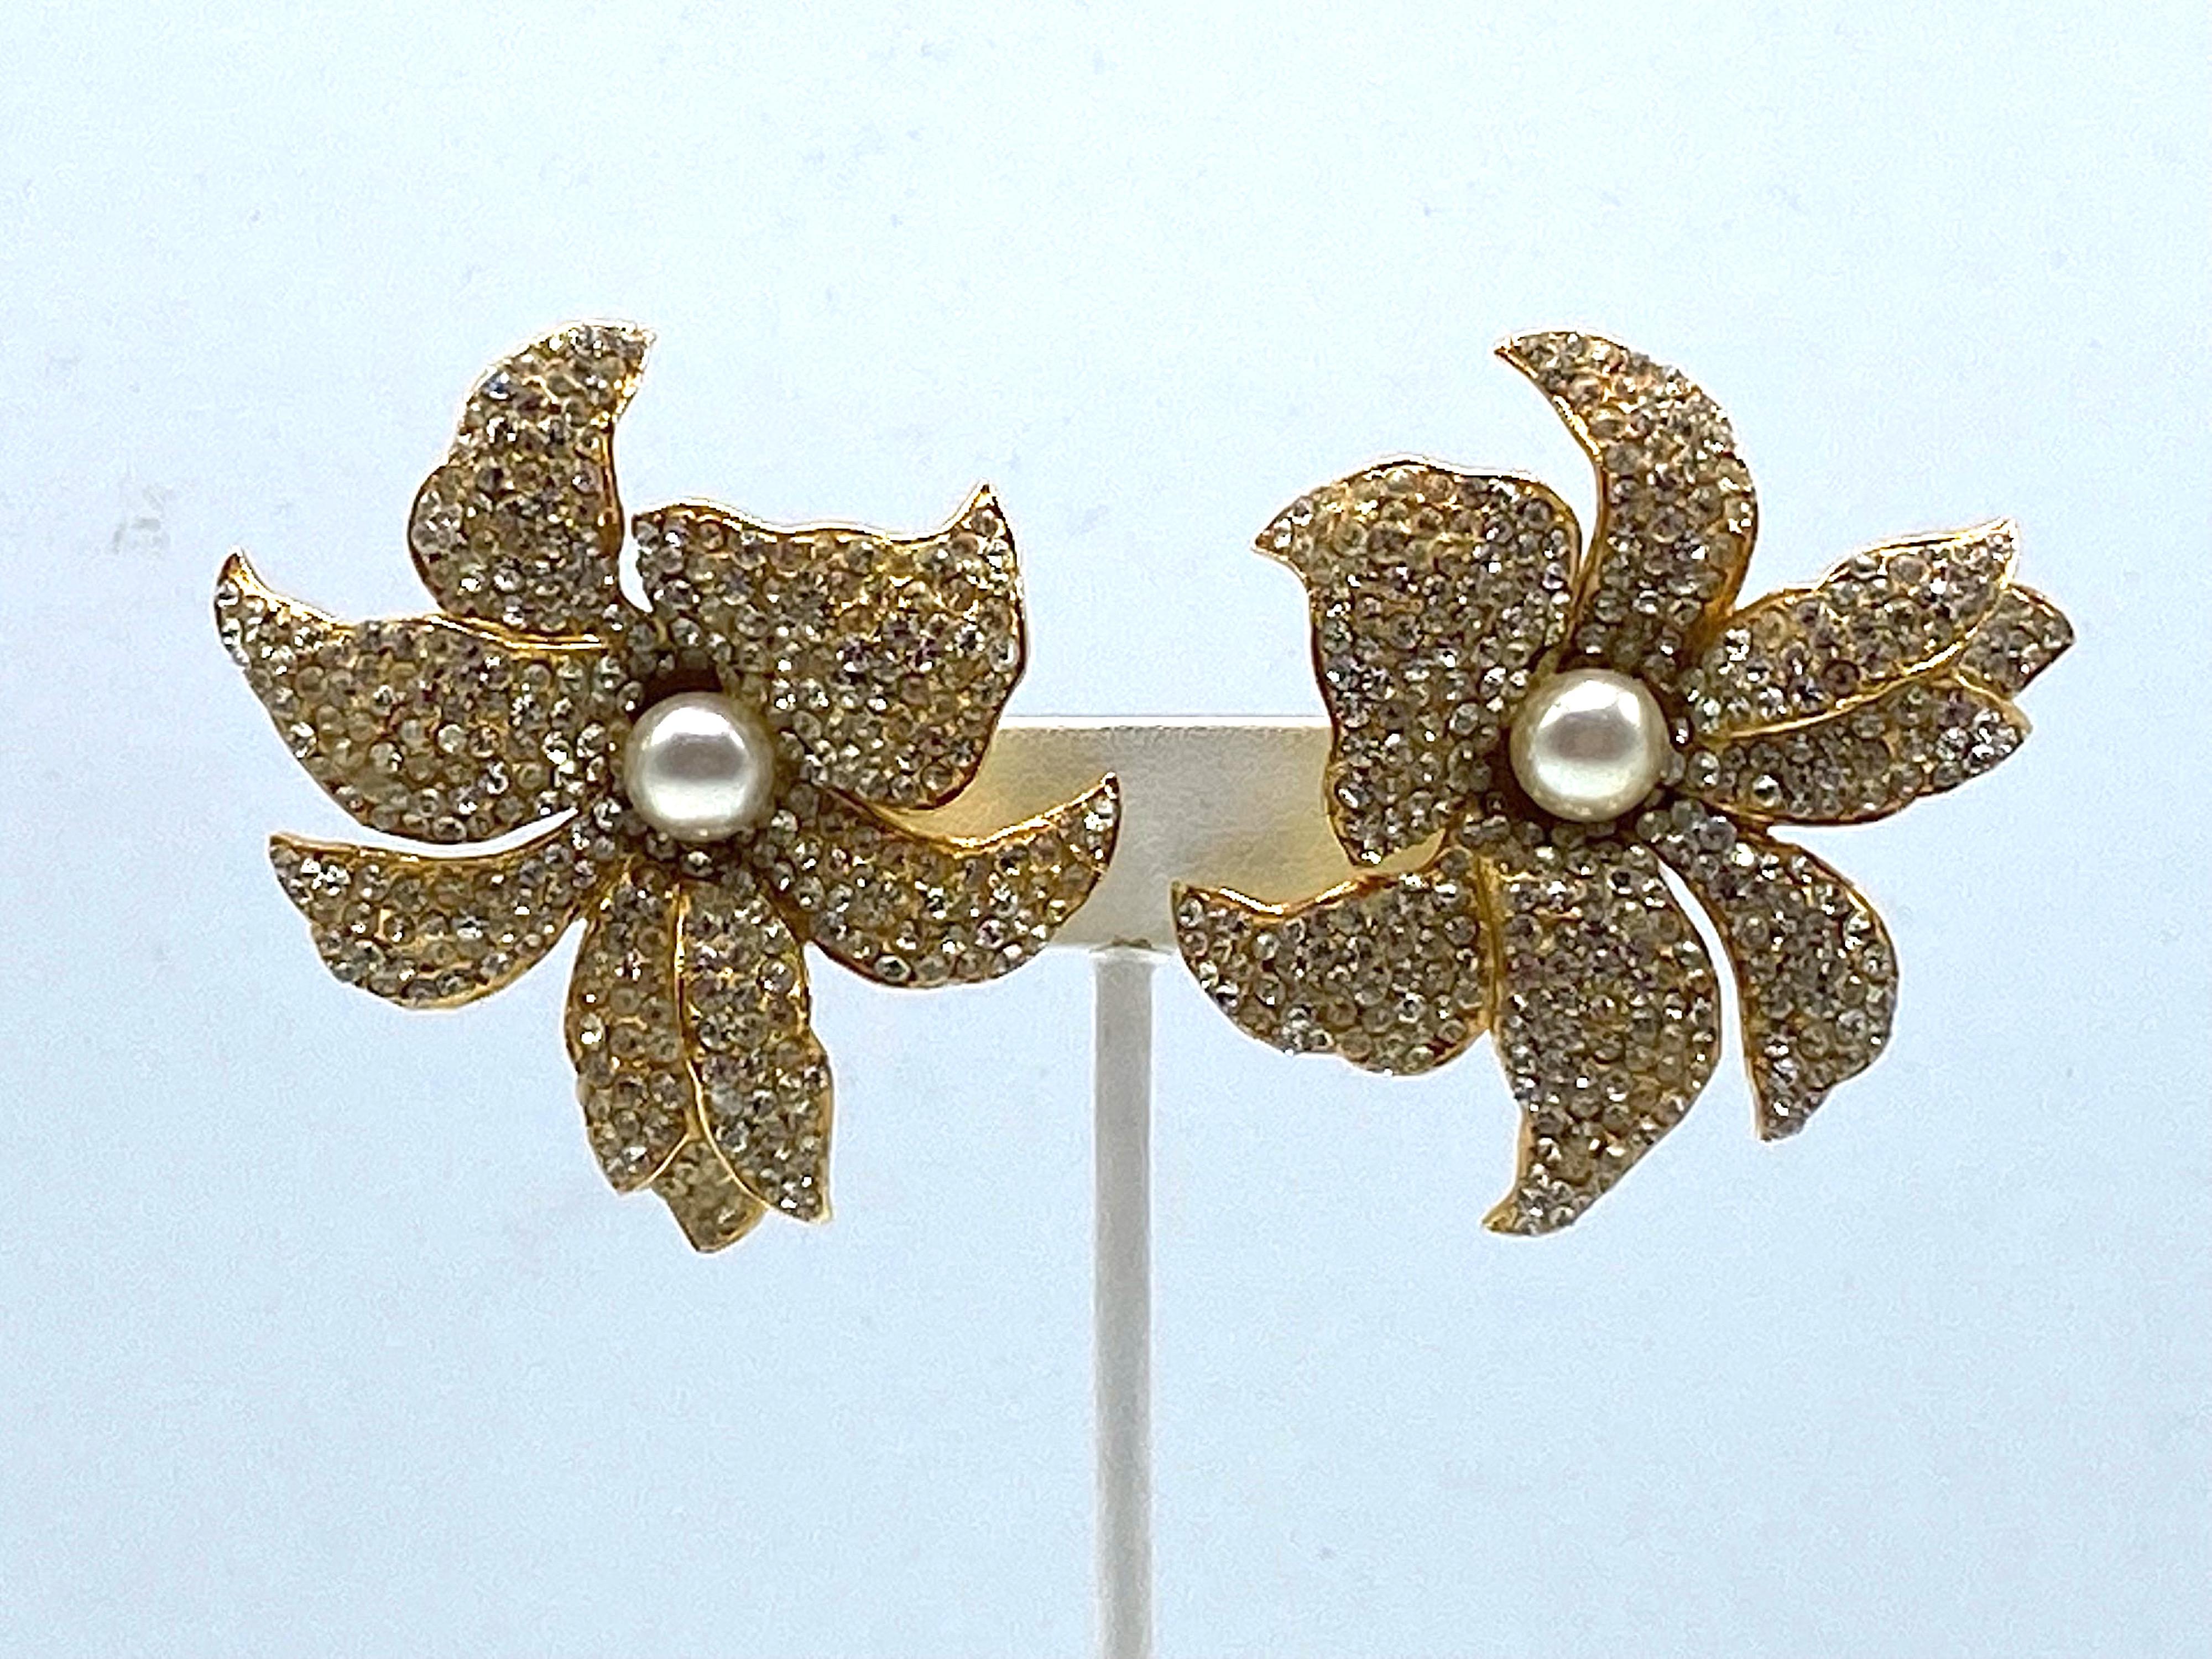 Women's Borbonese, Italy Gold with Pave' Rhinestone Large Flower Earrings